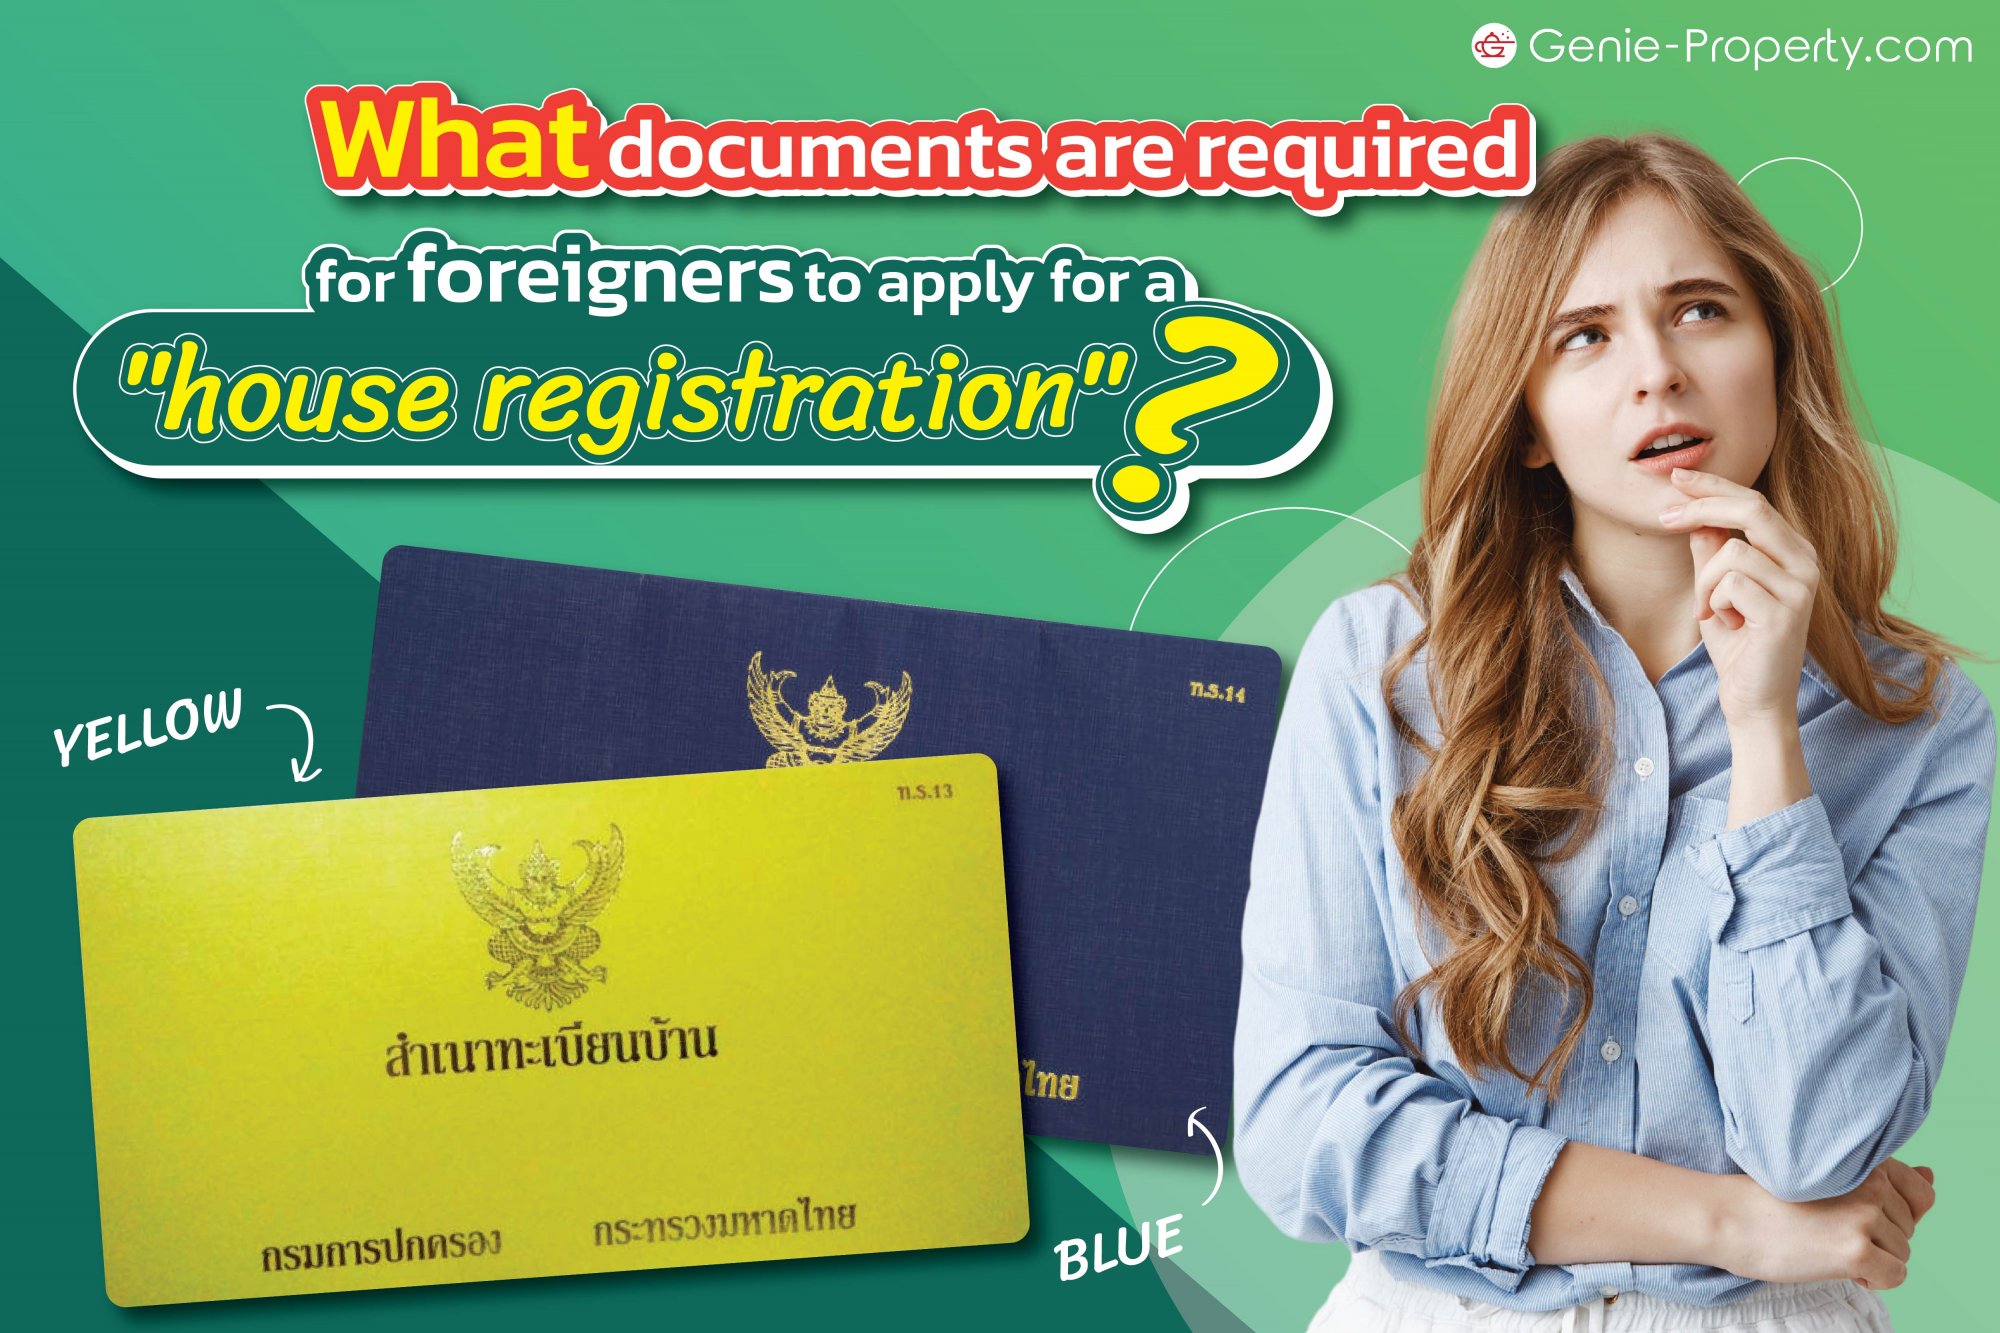 image for What documents are required for foreigners to apply for a "house registration"?